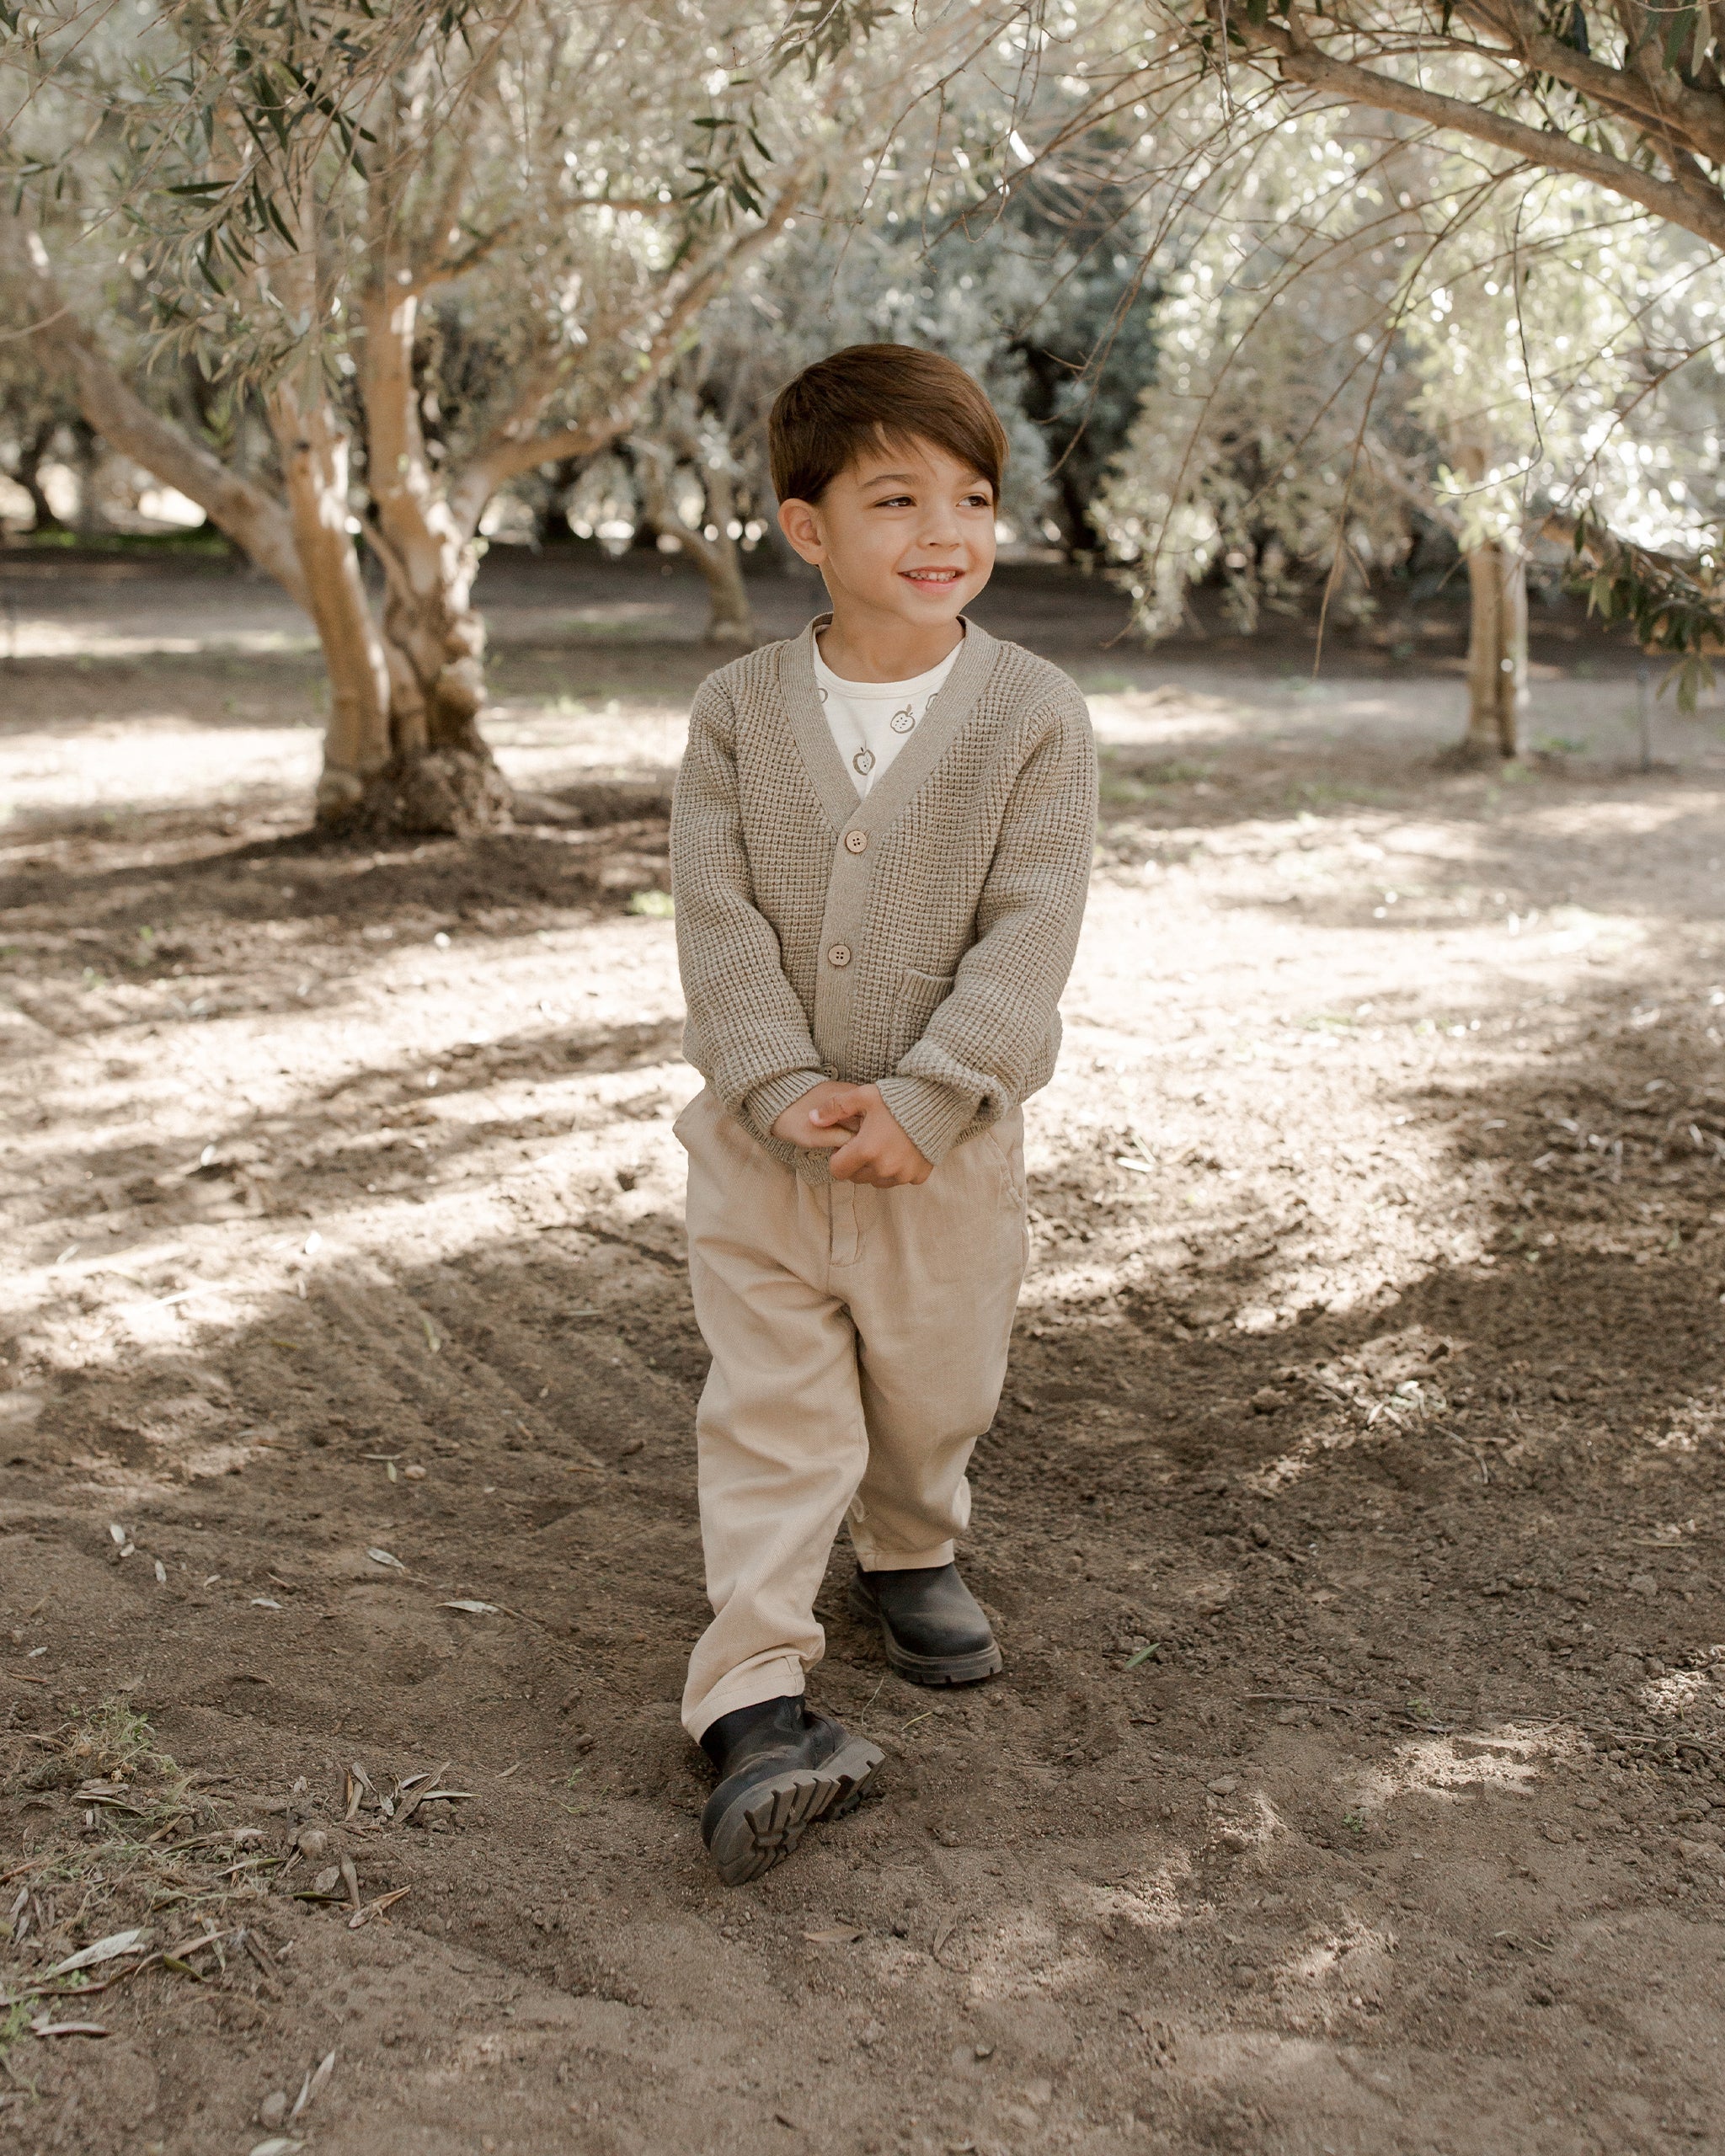 Boys Cardigan || Heathered Fern - Rylee + Cru | Kids Clothes | Trendy Baby Clothes | Modern Infant Outfits |